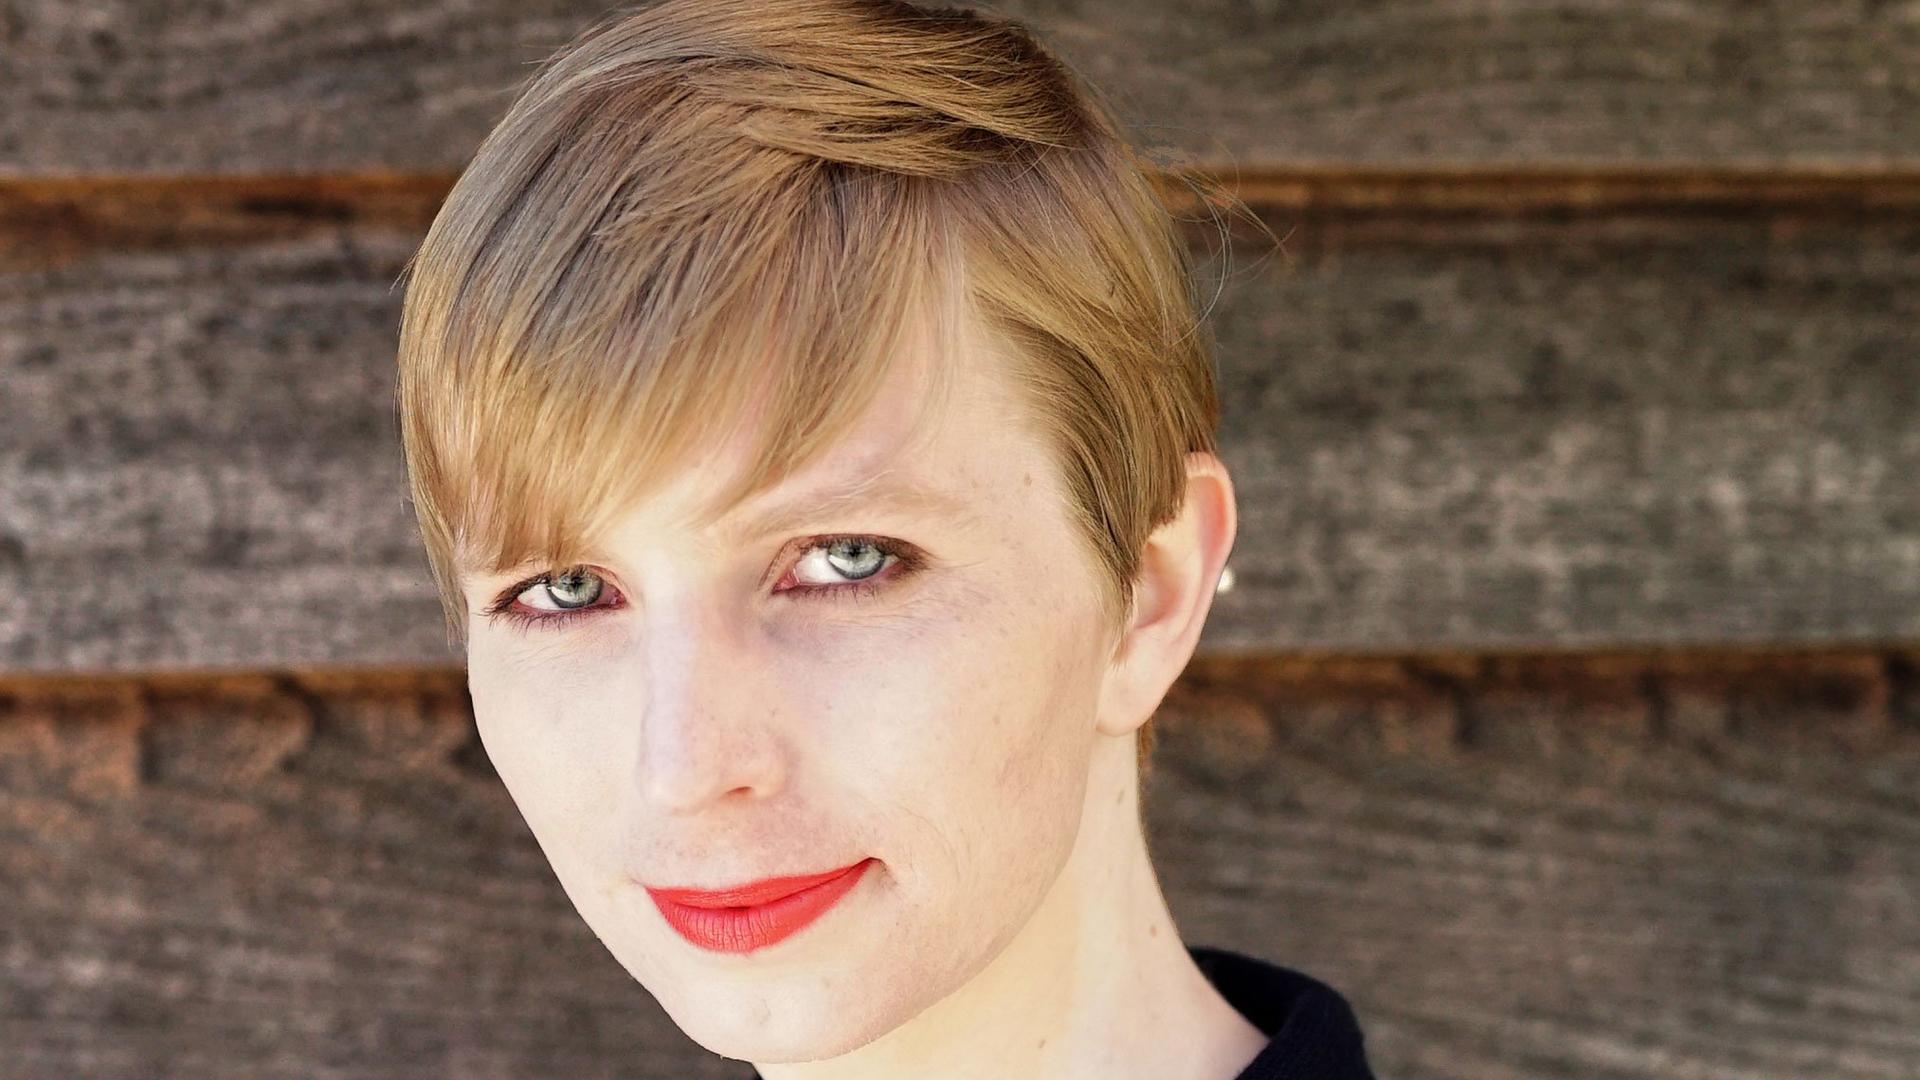 Chelsea Manning pictured in a photograph published to her Twitter account on May 18.